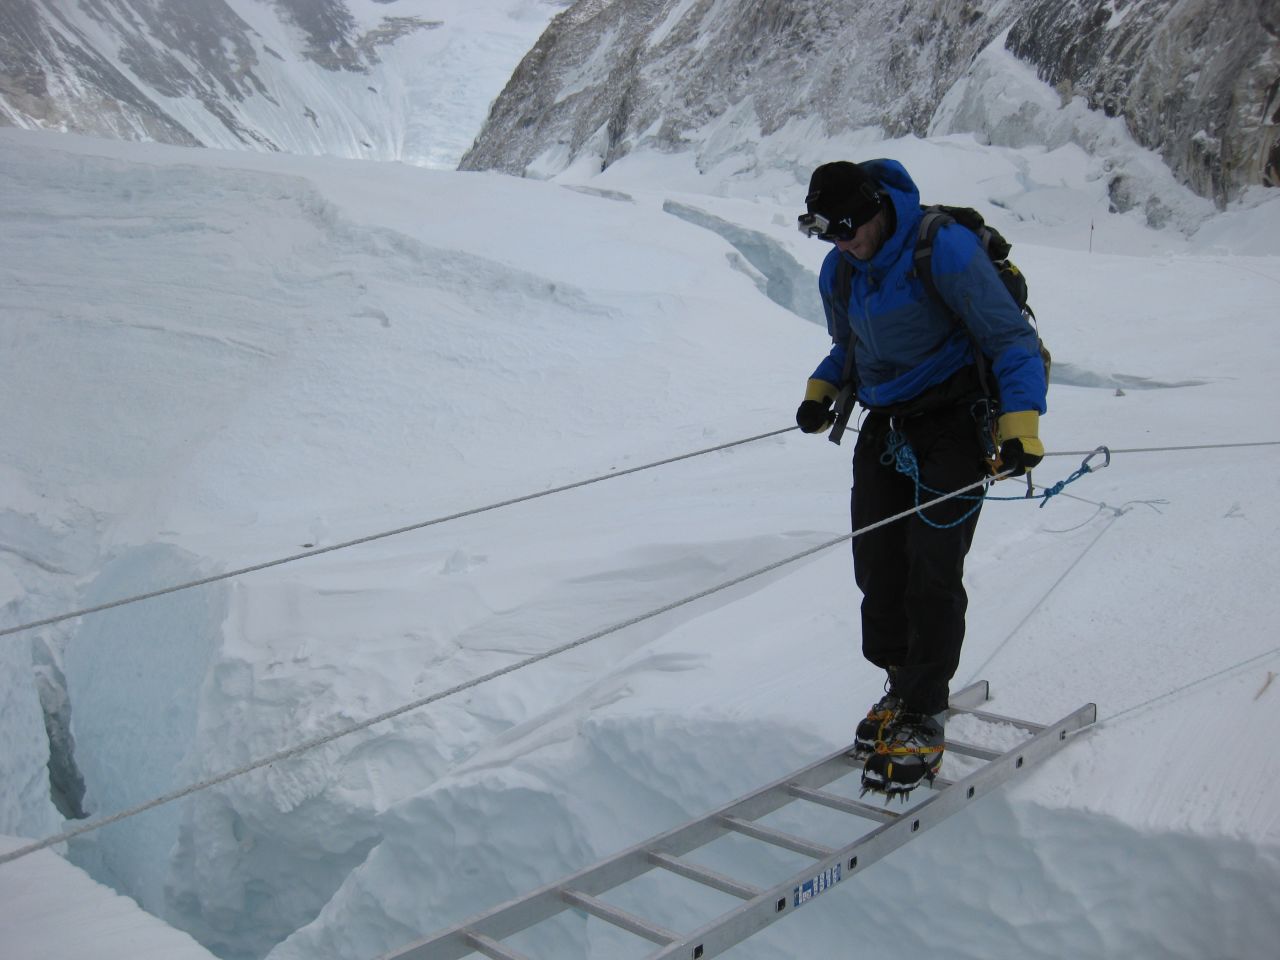 Kedrowski crosses a crevasse in the Khumbu Icefall on a ladder. Teaching clients how to walk in crampons and using other equipment in icy conditions is key to helping them acclimate.